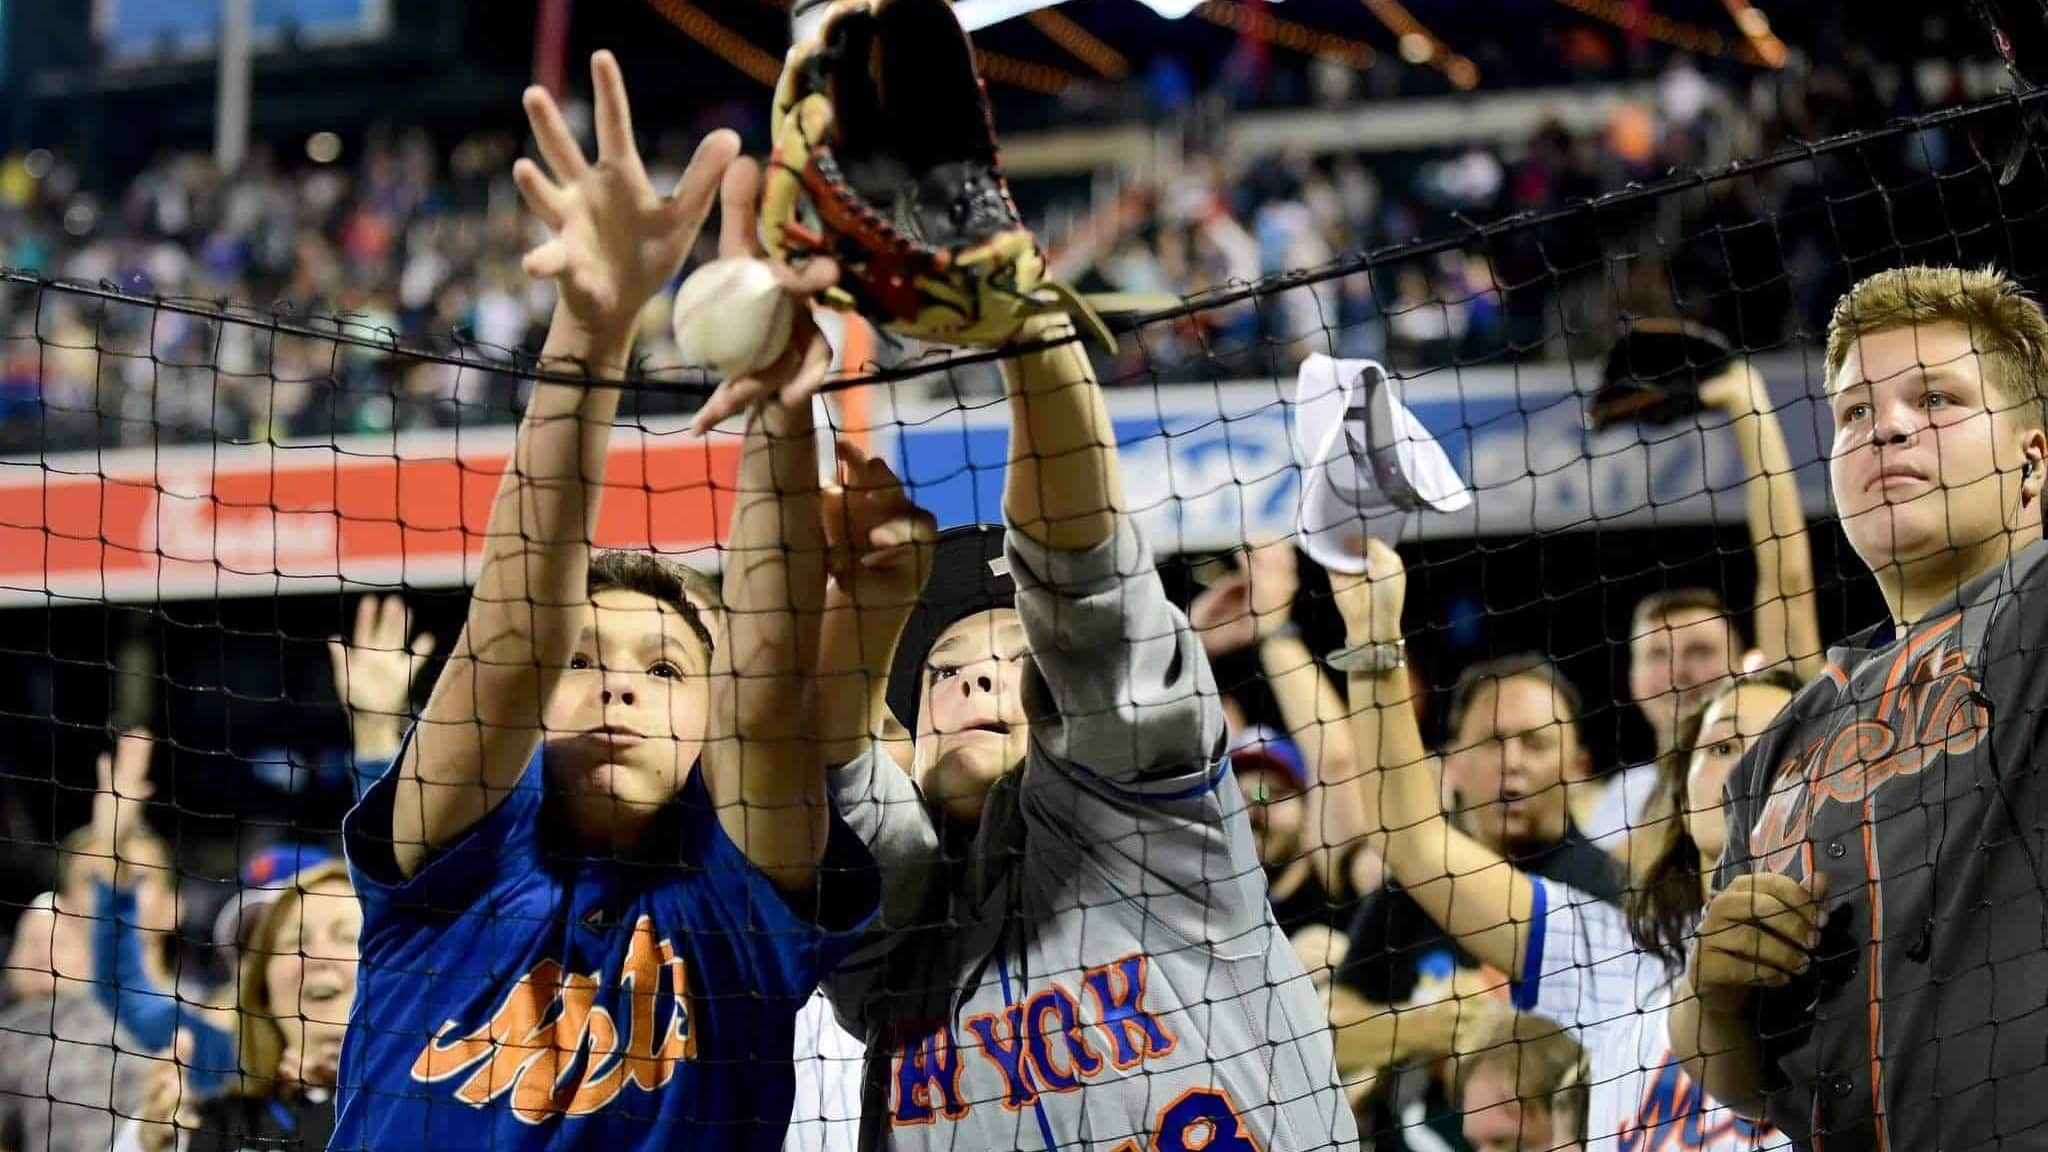 NEW YORK, NEW YORK - SEPTEMBER 27: Fans reach for a ball thrown by Robinson Cano #24 of the New York Mets during their game against the Atlanta Braves at Citi Field on September 27, 2019 in the Flushing neighborhood of the Queens borough of New York City.